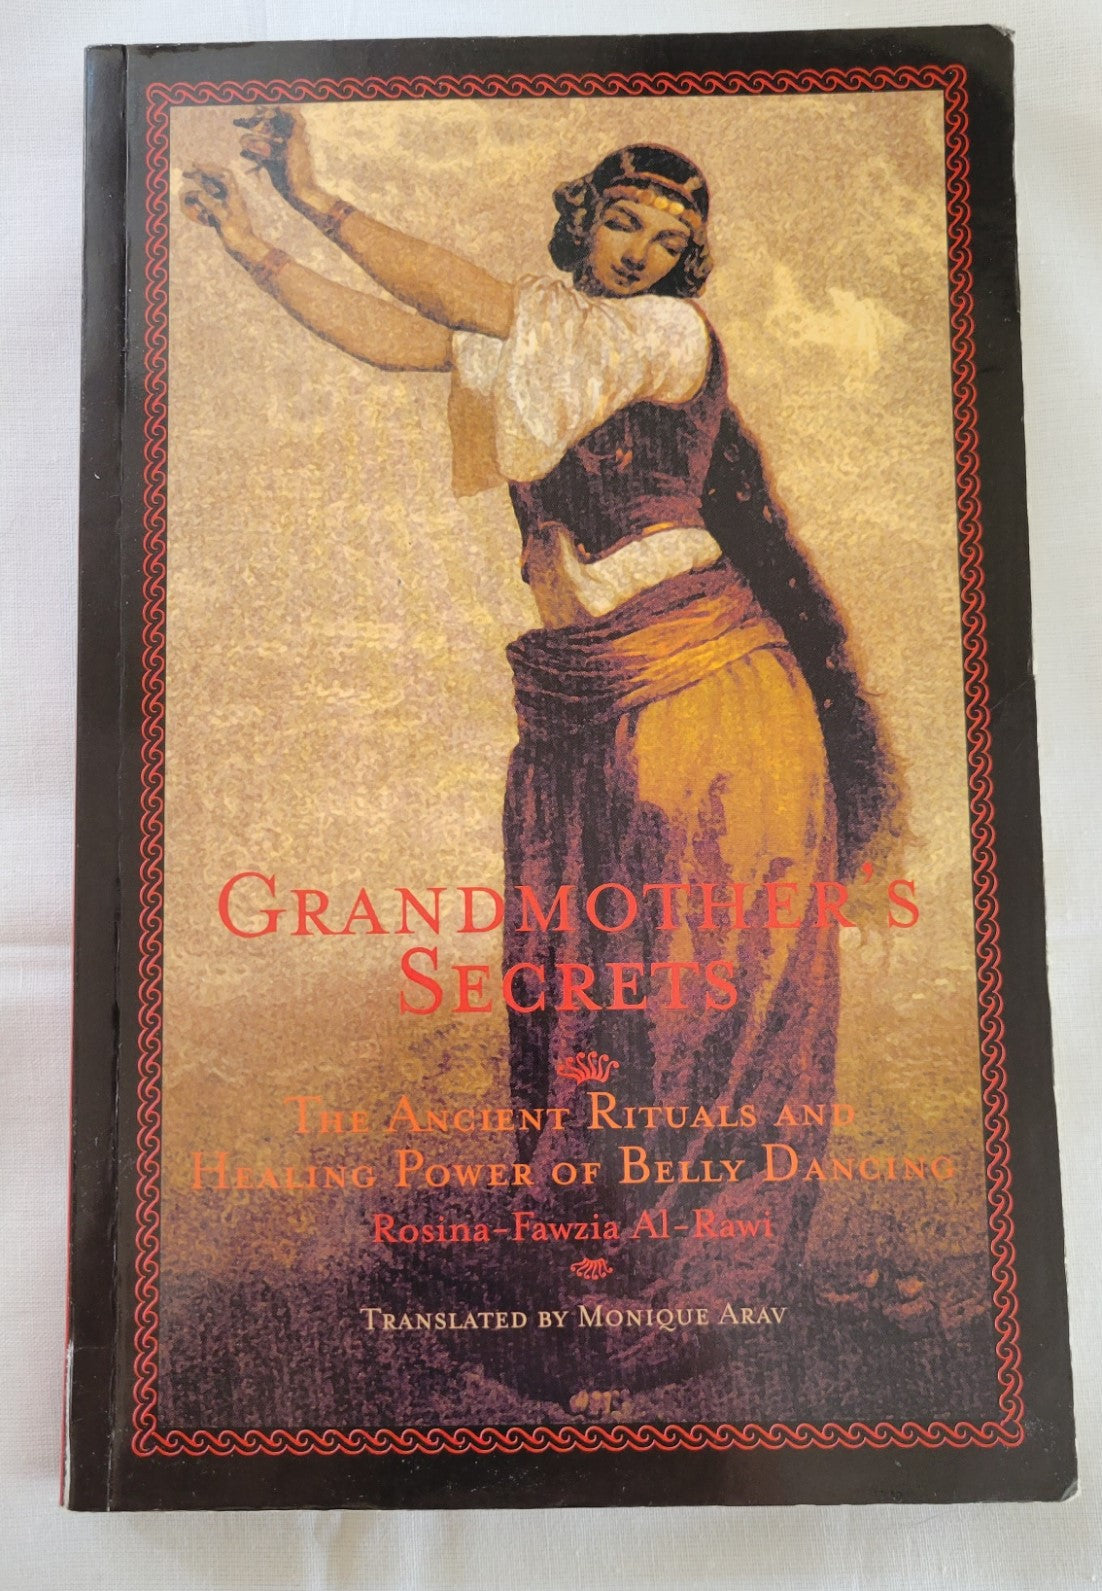 Used book for sale “Grandmother's Secrets: The Ancient Rituals and Healing Power of Belly Dancing” written by Rosina-Fawzia Al-Rawi, translated by Monique Arav.  View of front cover.